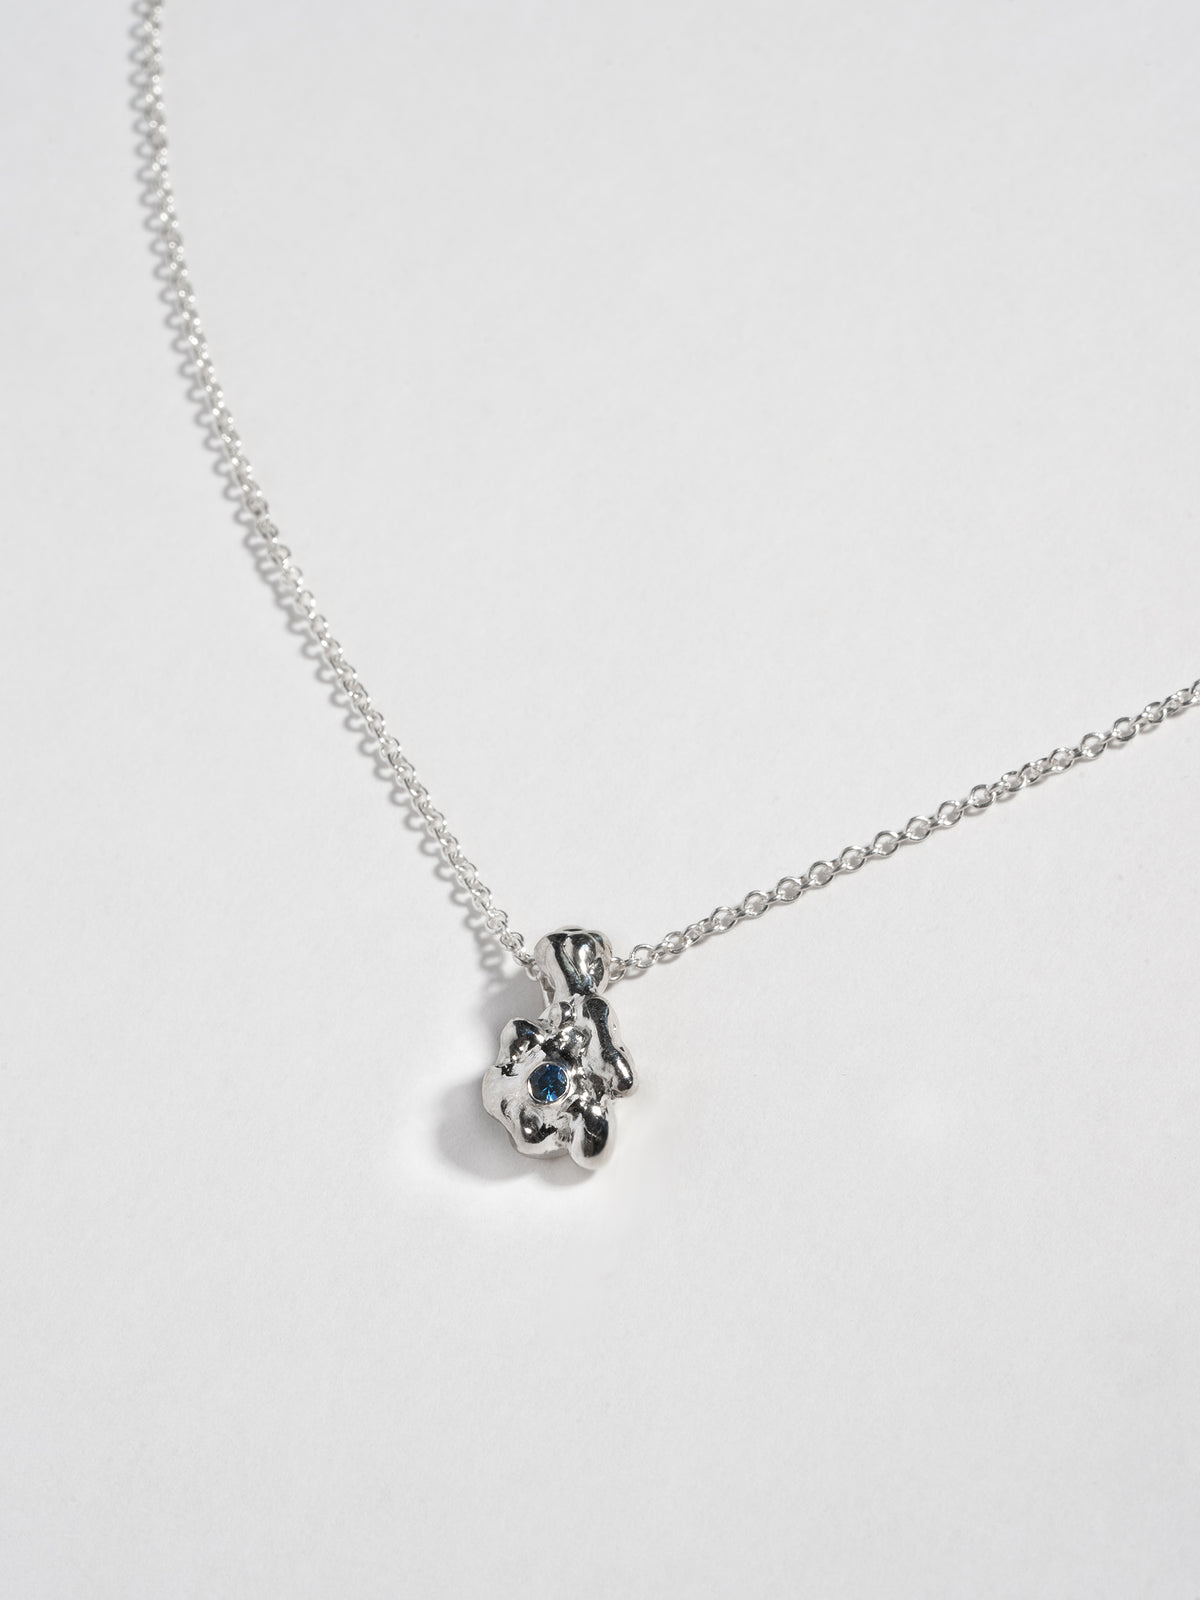 Close up of Sterling silver GOBBO Necklace pendant with blue sapphire